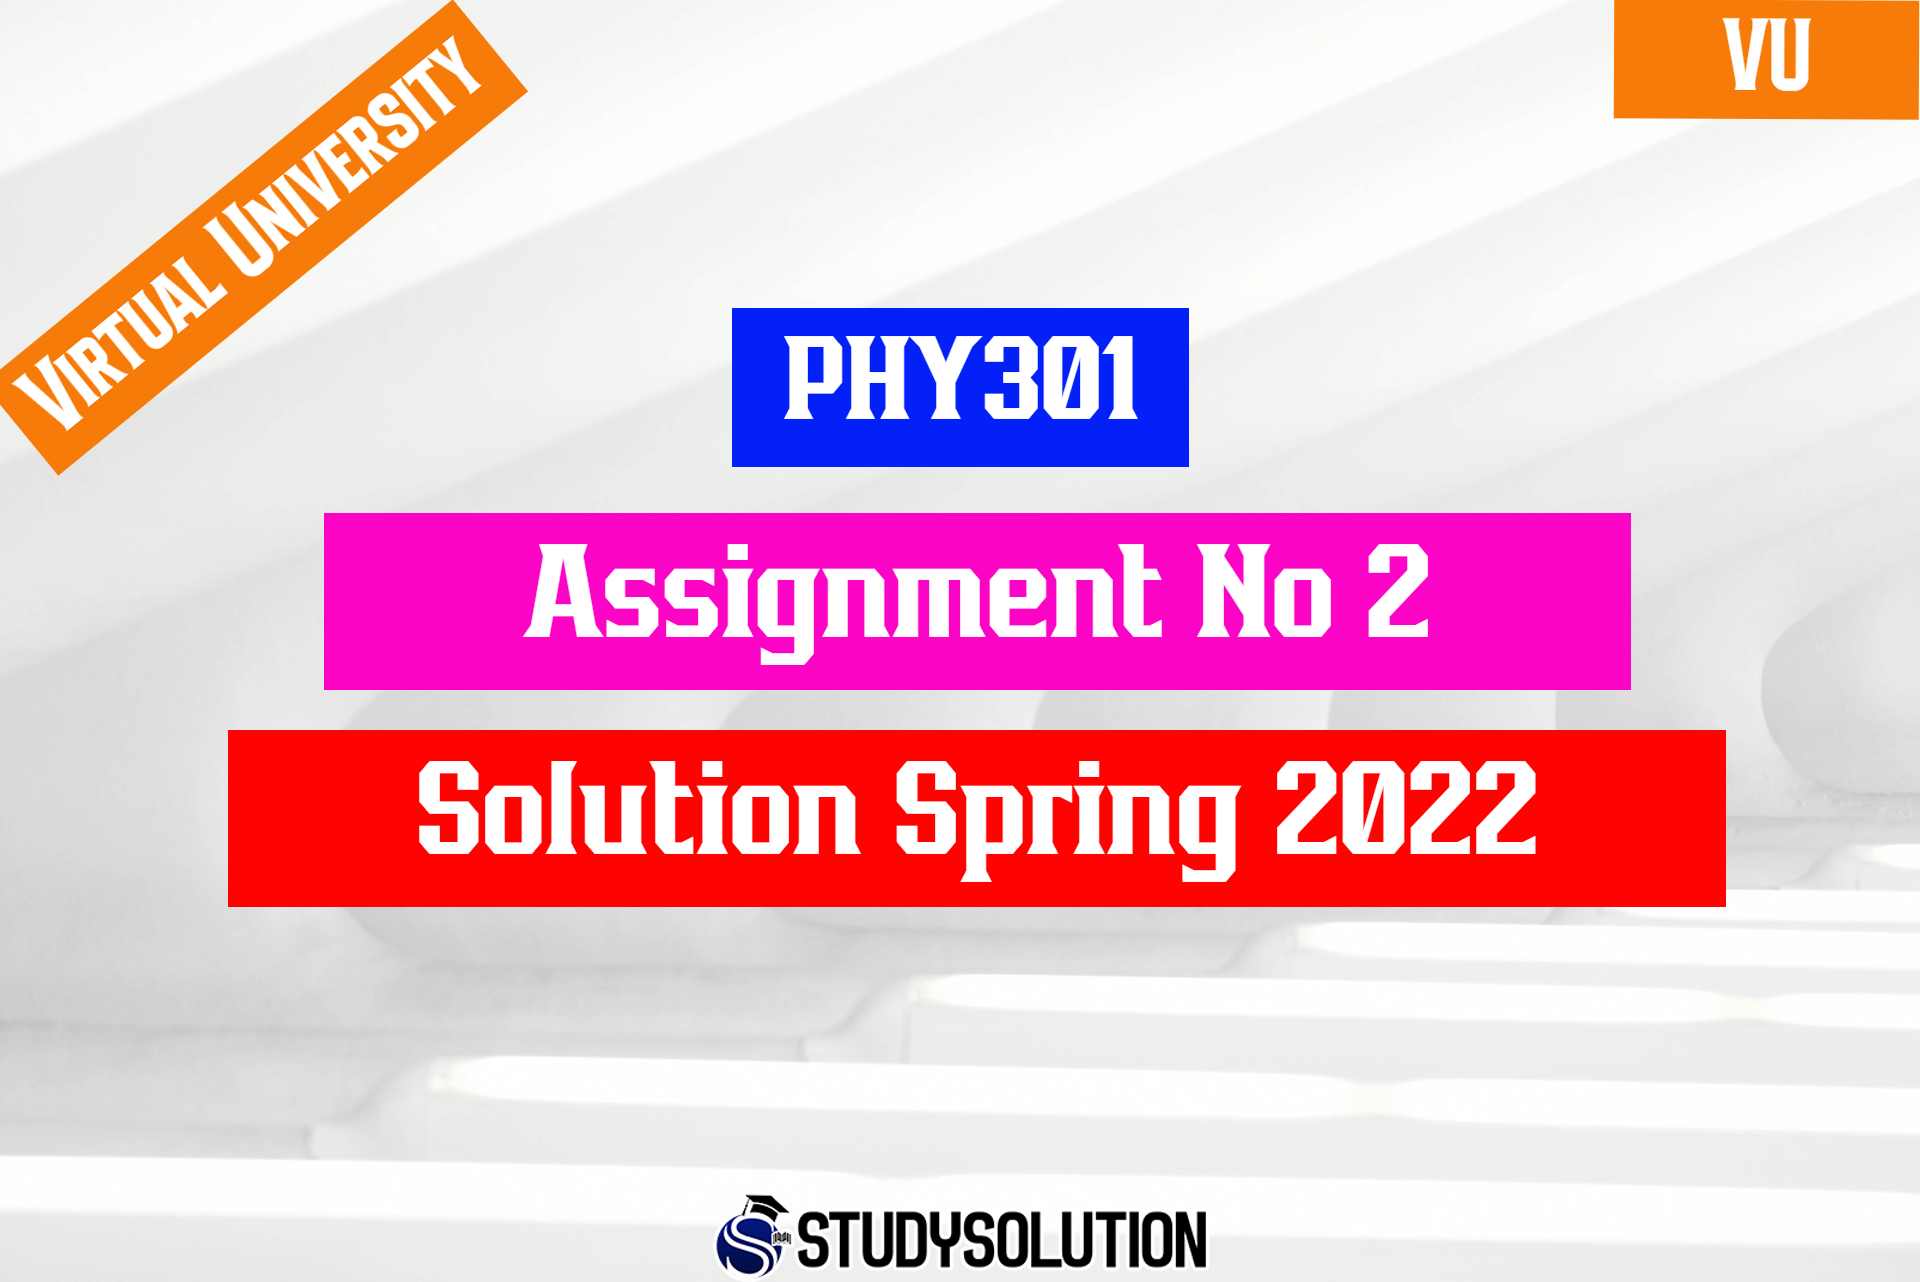 PHY301 Assignment No 2 Solution Spring 2022